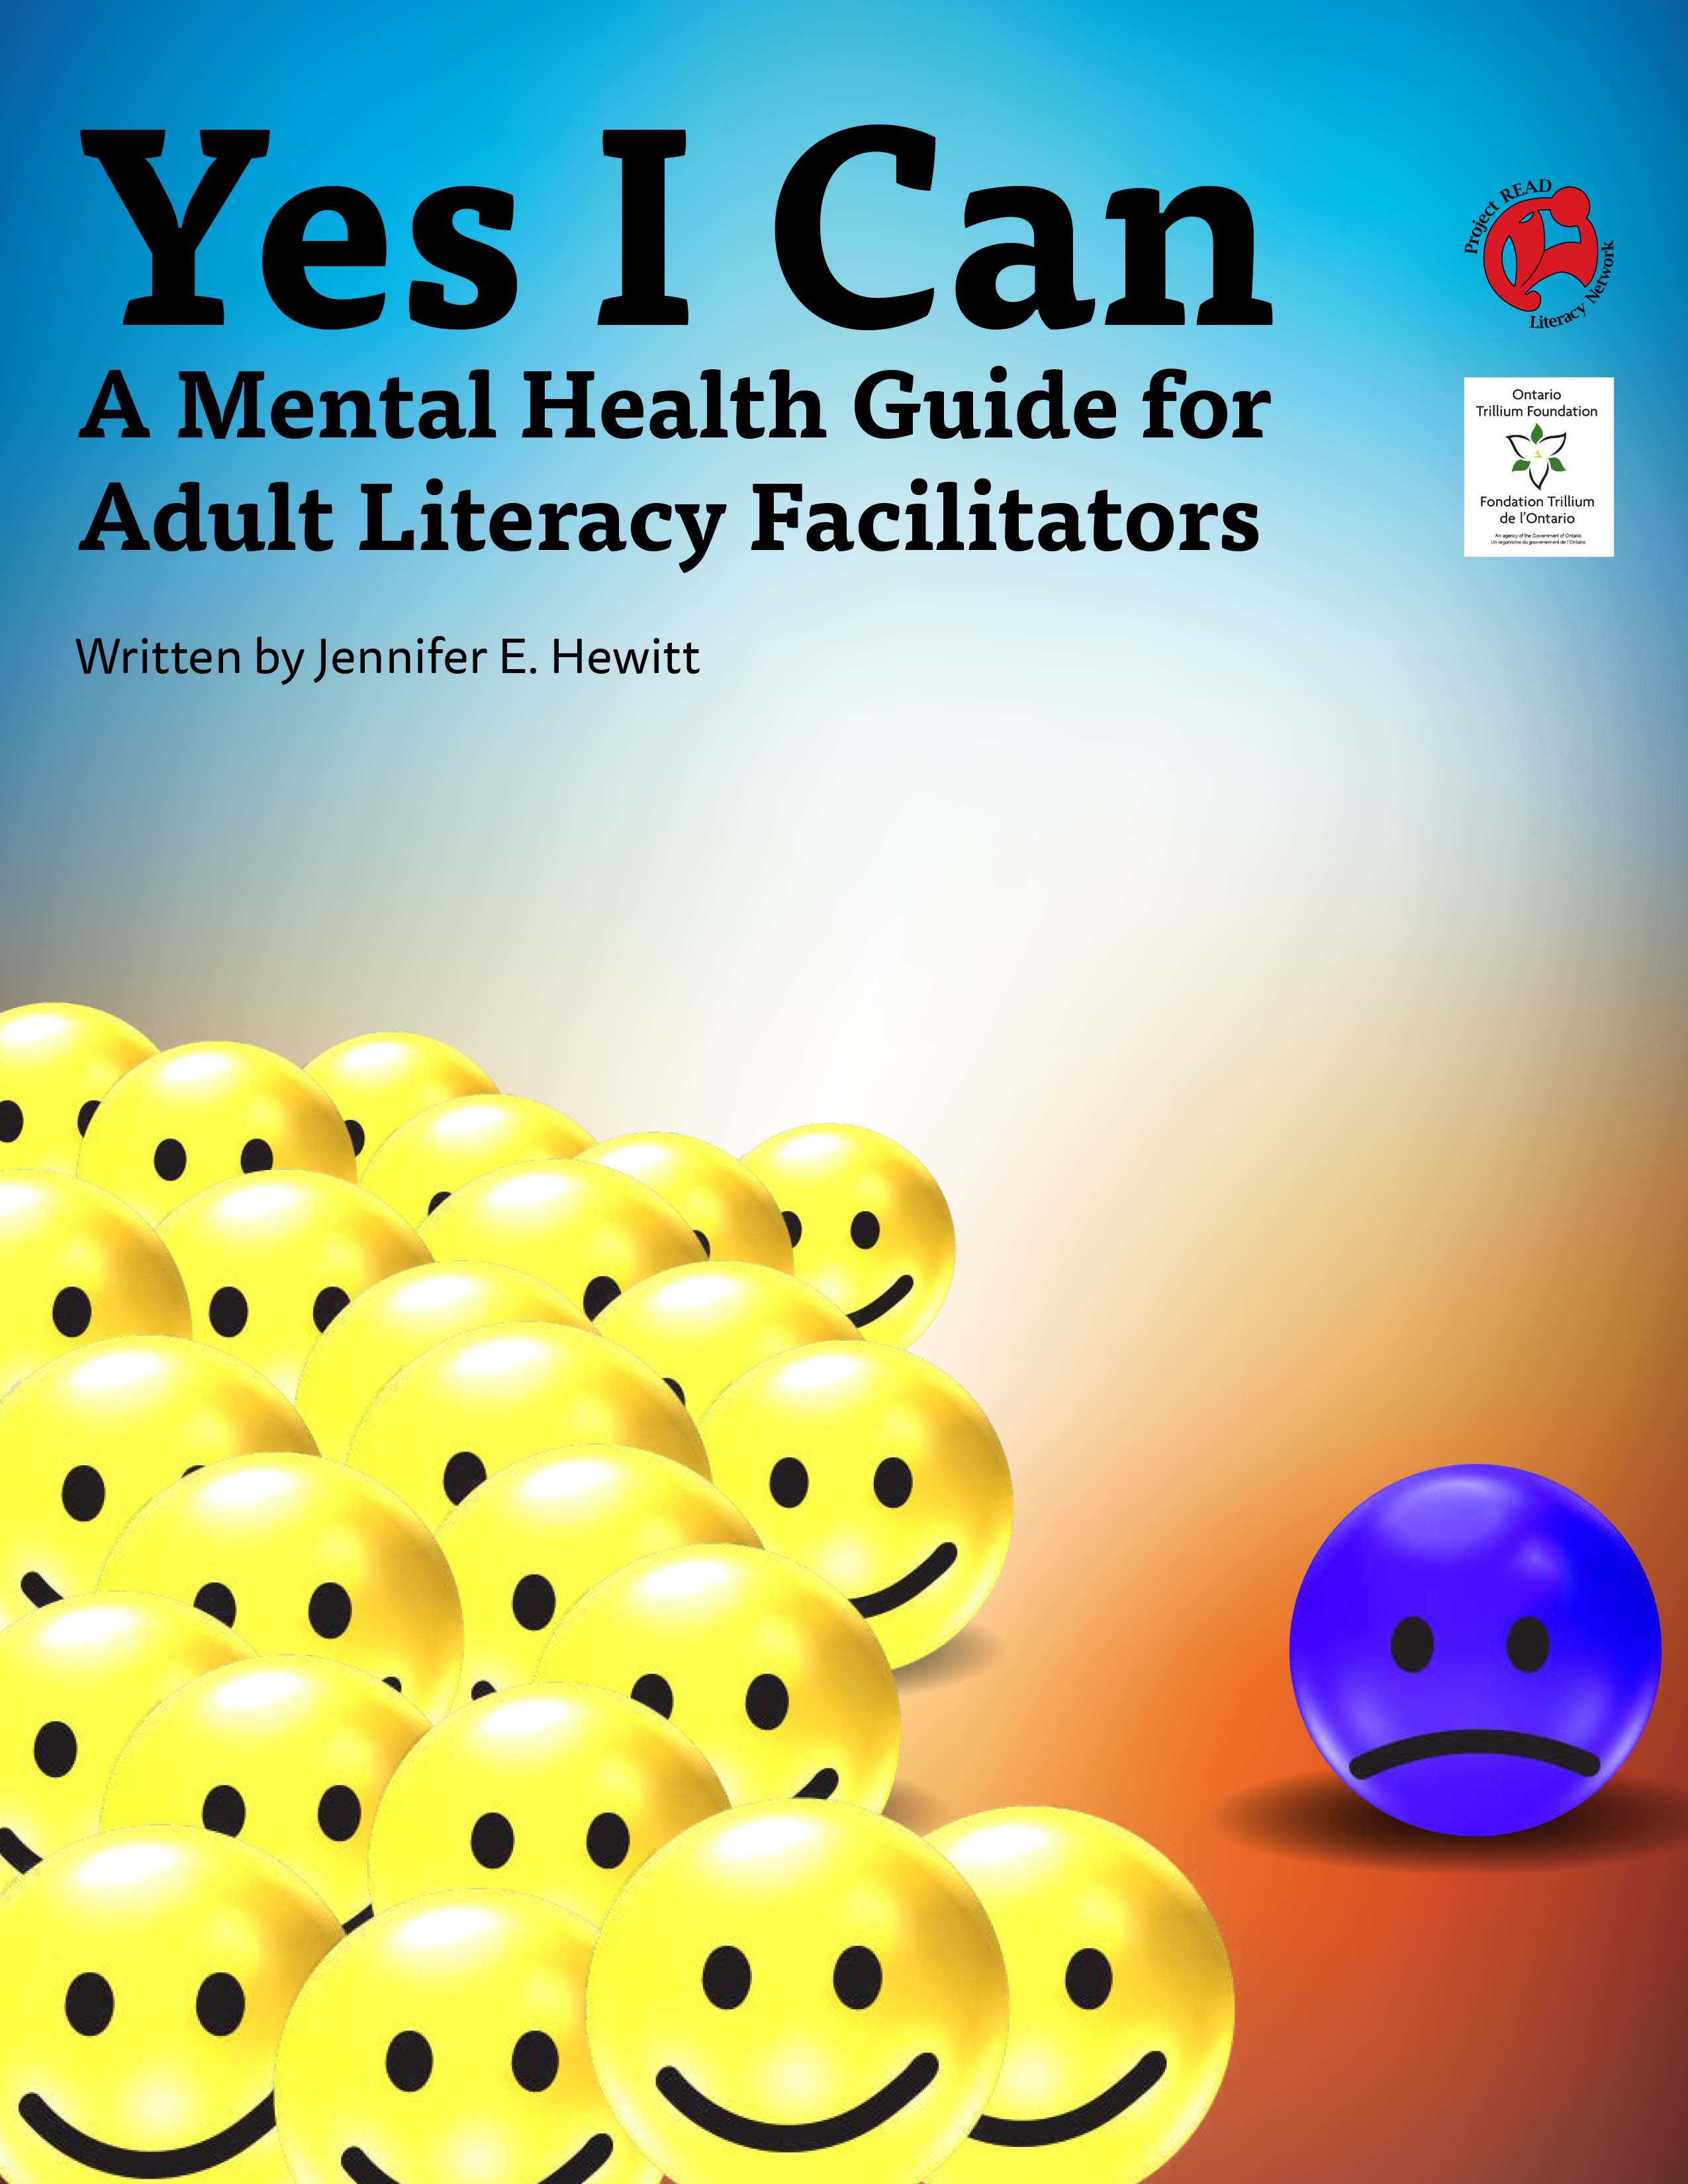 Yes I Can - A Mental Health Guide for Adult Literacy Facilitators